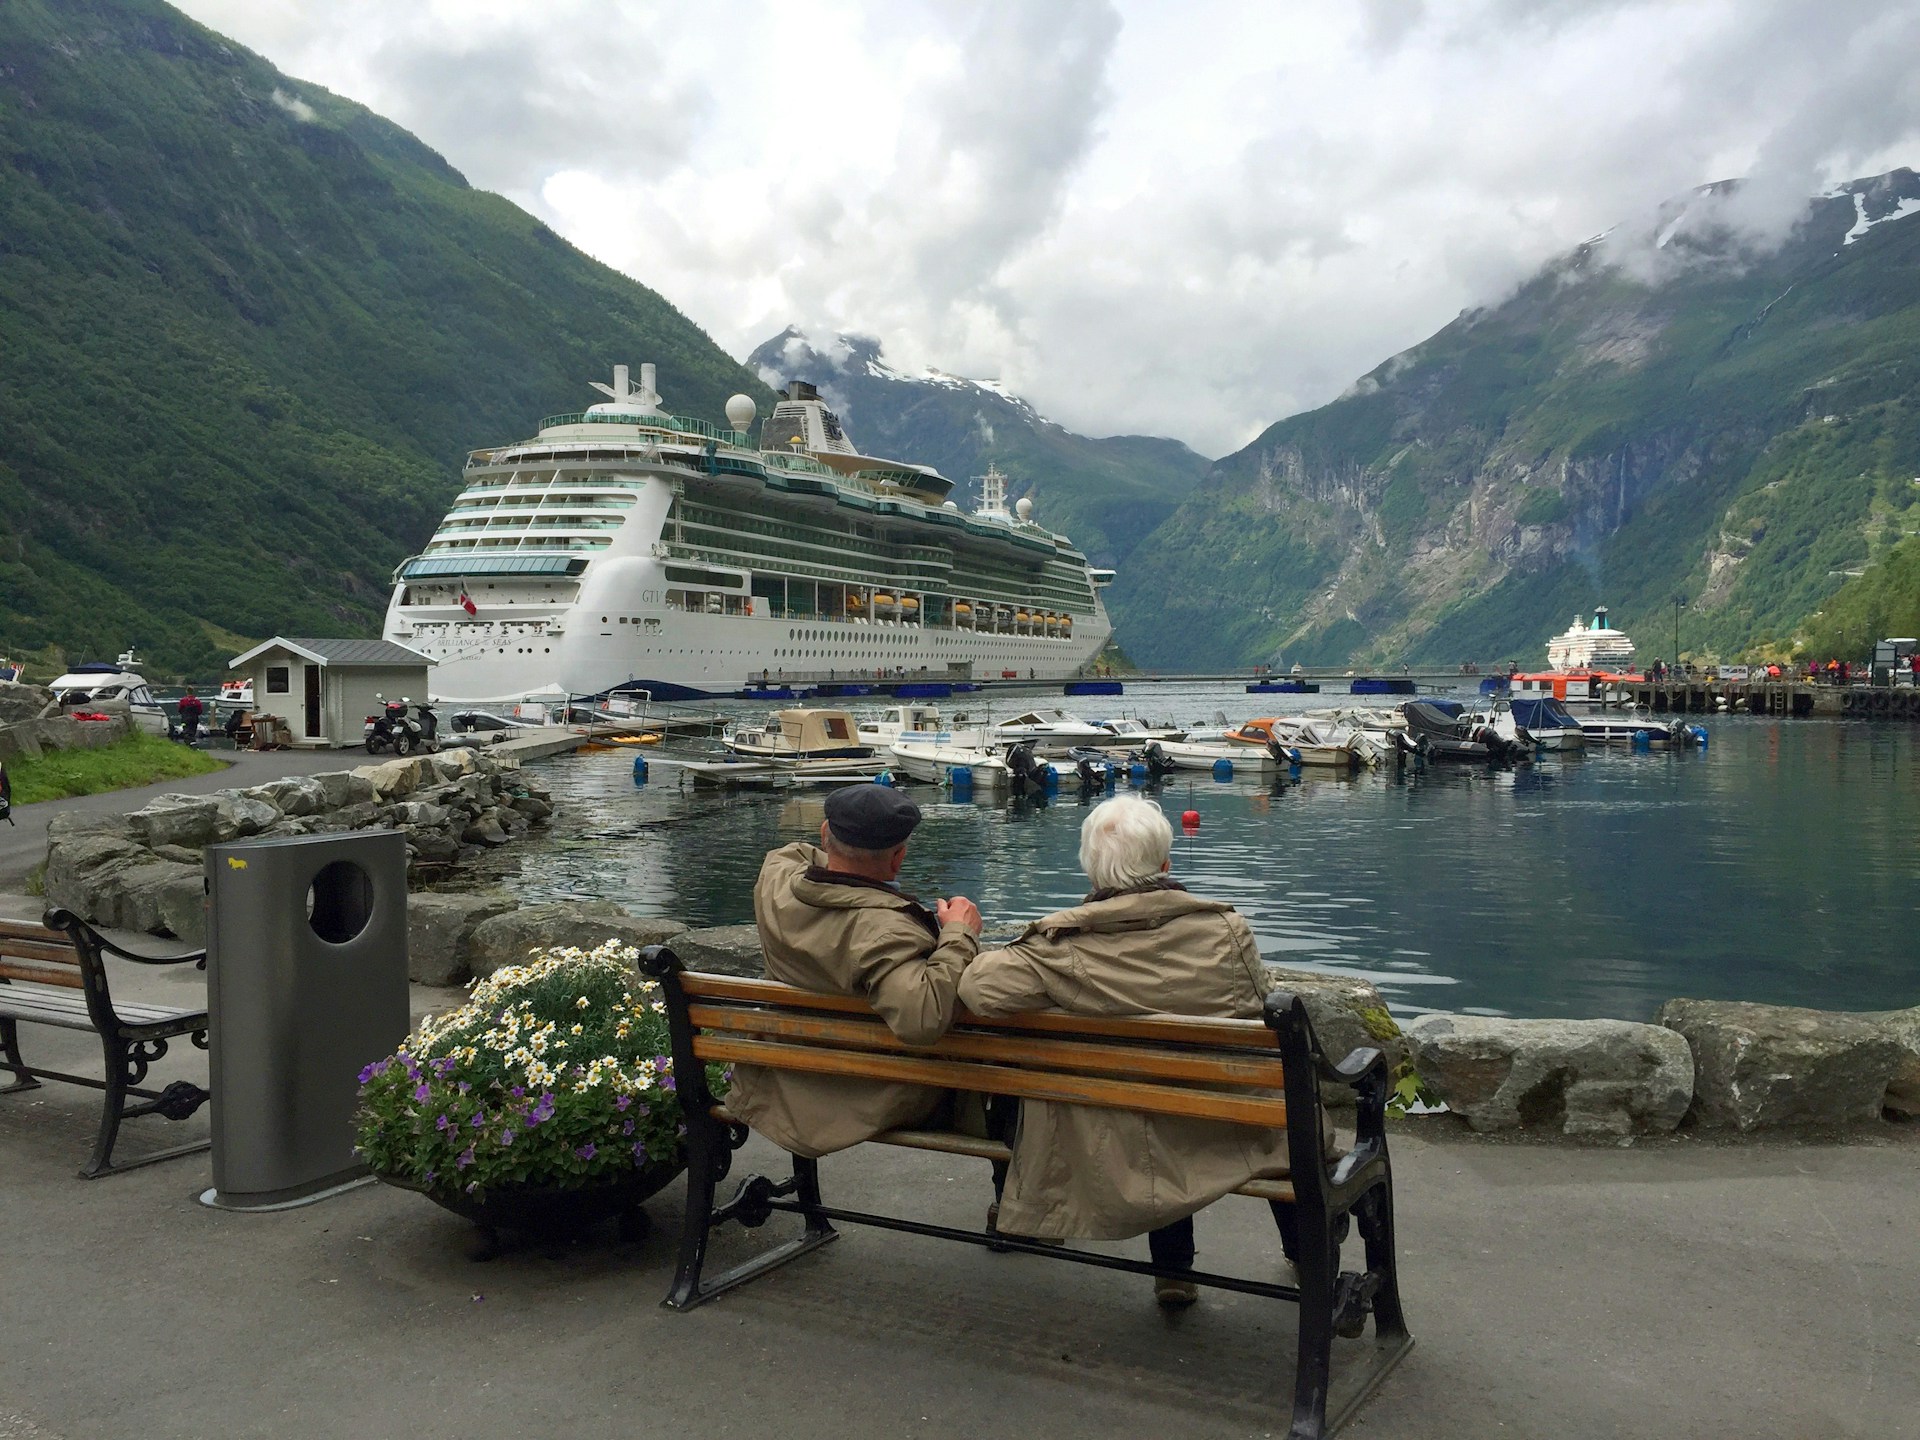 A senior couple sitting on a bench watching a cruise ship | Source: Unsplash